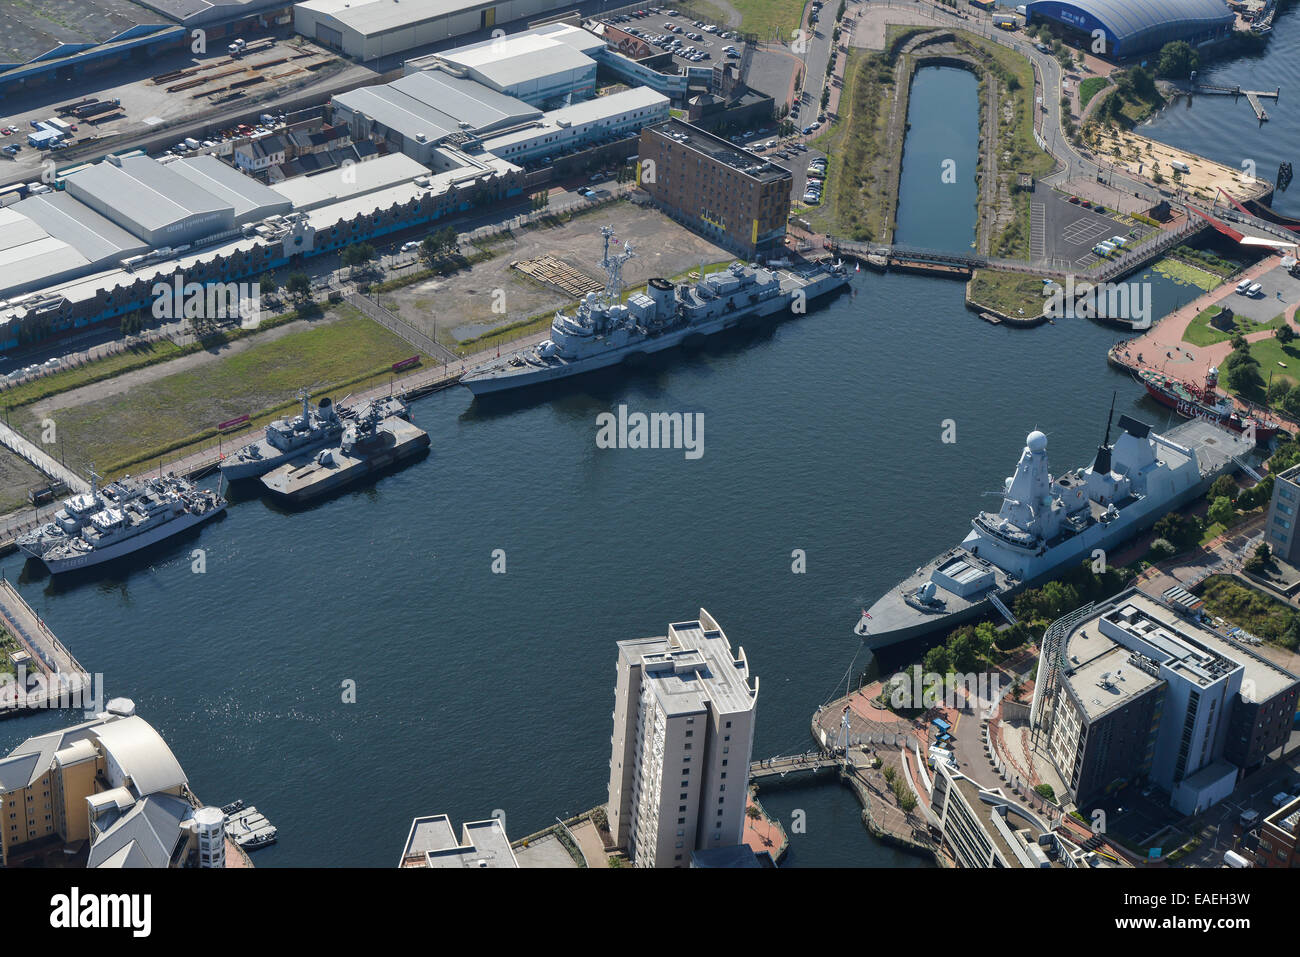 An aerial view of Warships in Cardiff during the 2014 NATO Summit Stock Photo